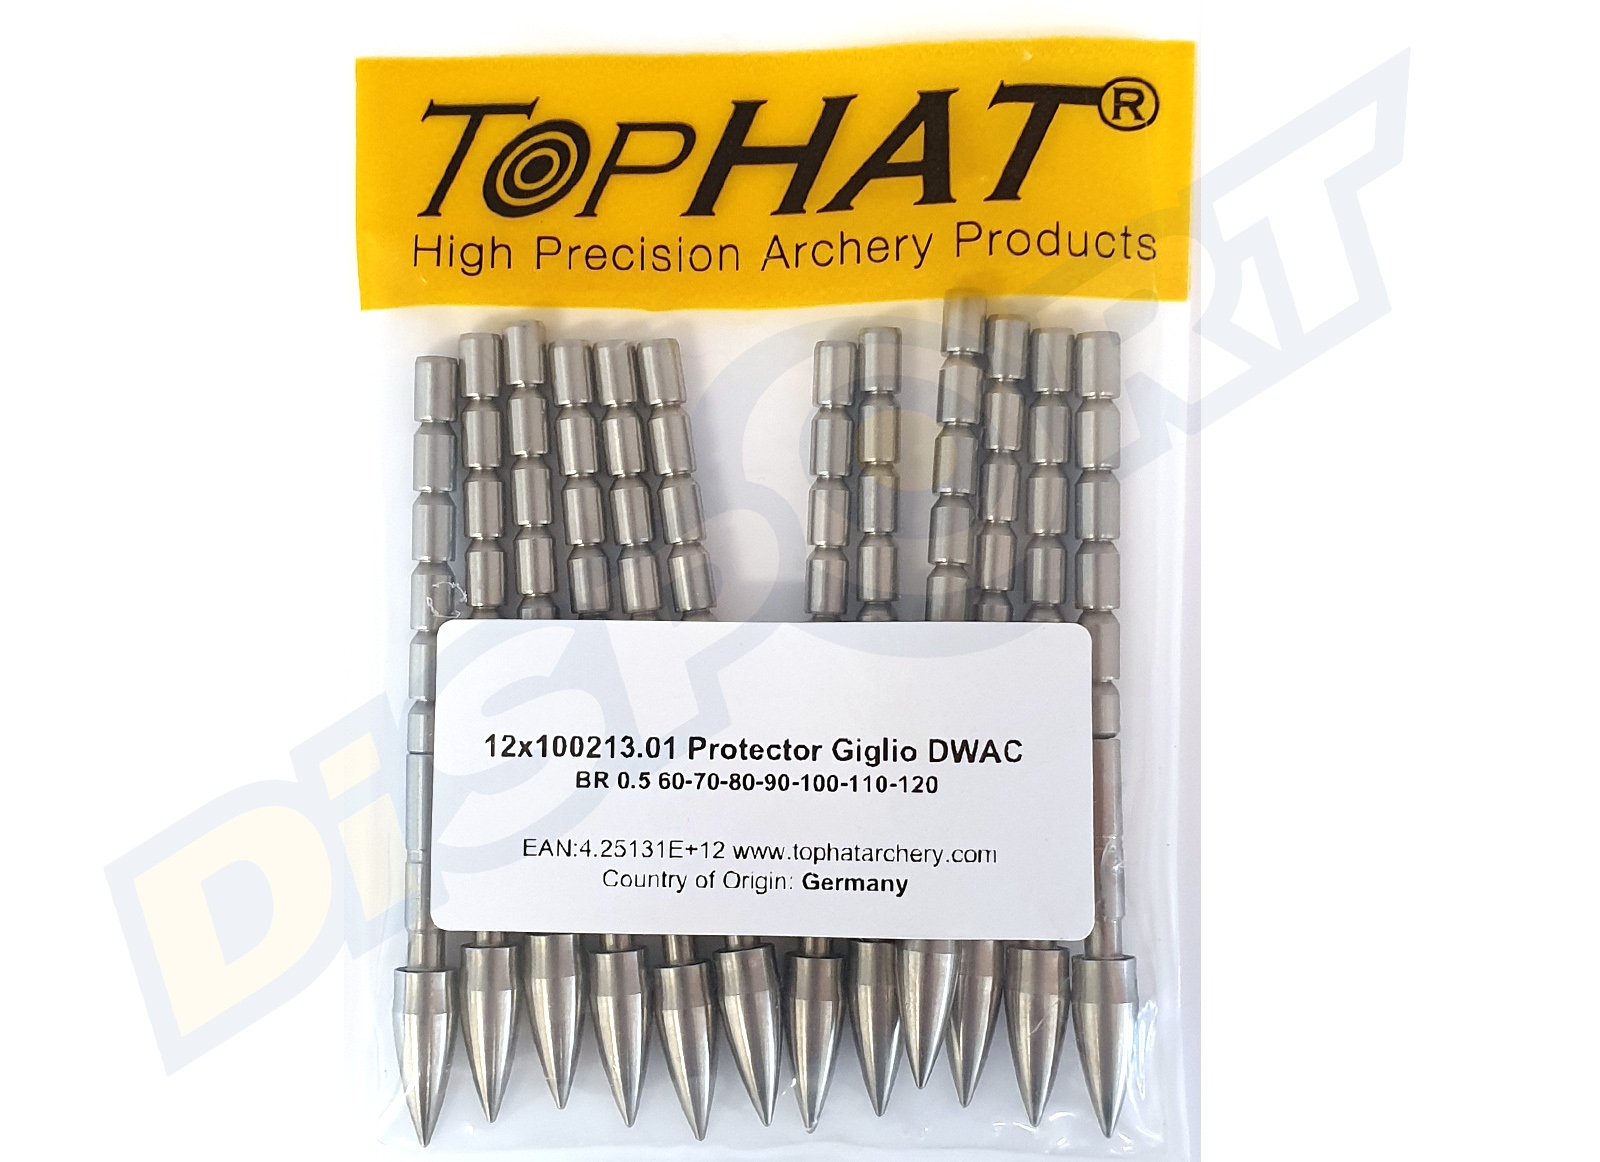 TOPHAT PROTECTOR GIGLIO DWAC BR 0.5 SET 12 PUNTE 60-70-80-90-100-110-120 gr (100213.01)